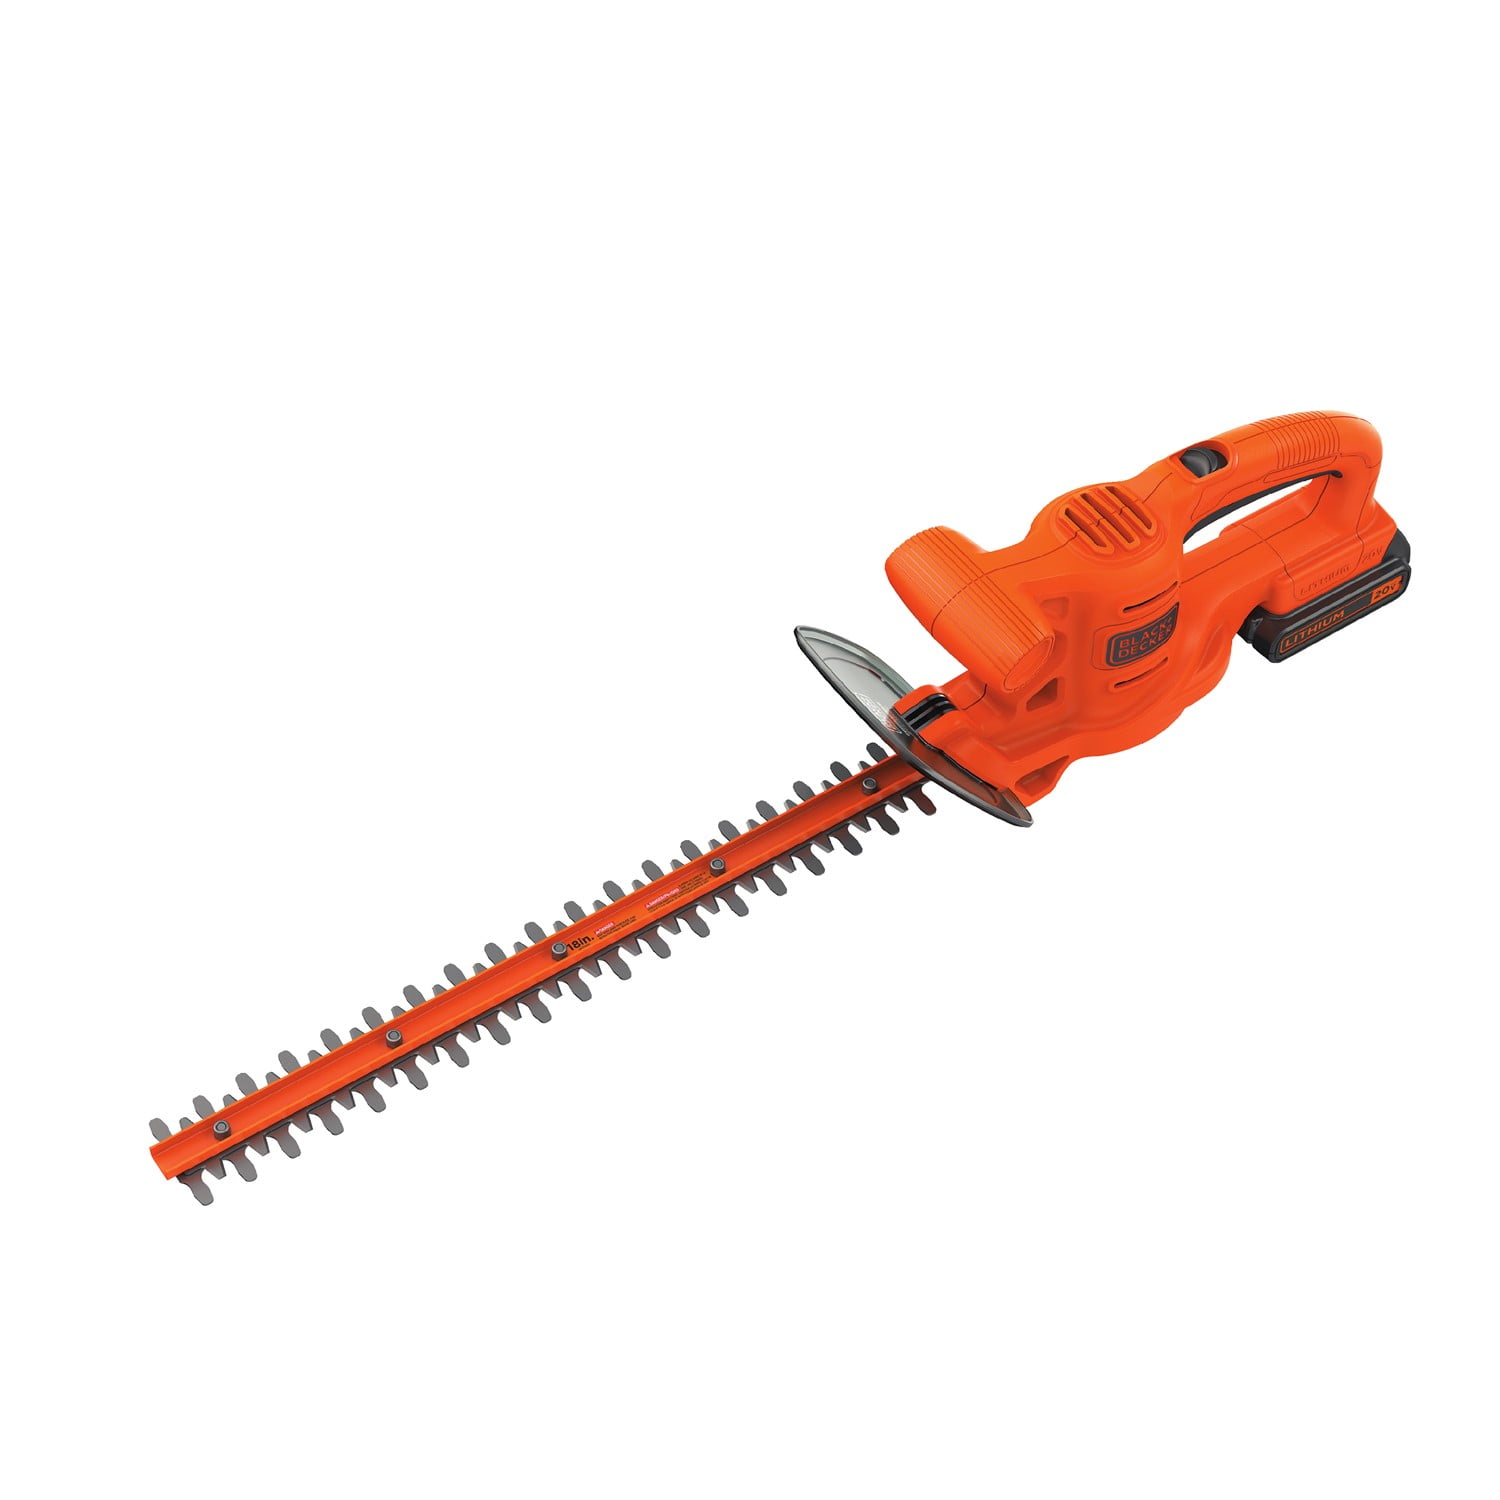 VEVOR 20V Cordless Hedge Trimmer 18 inch Double-Edged Steel Blade Hedge Trimmer Kit 20V Battery Fast Charger and Blade Cover Included 180° Rotating